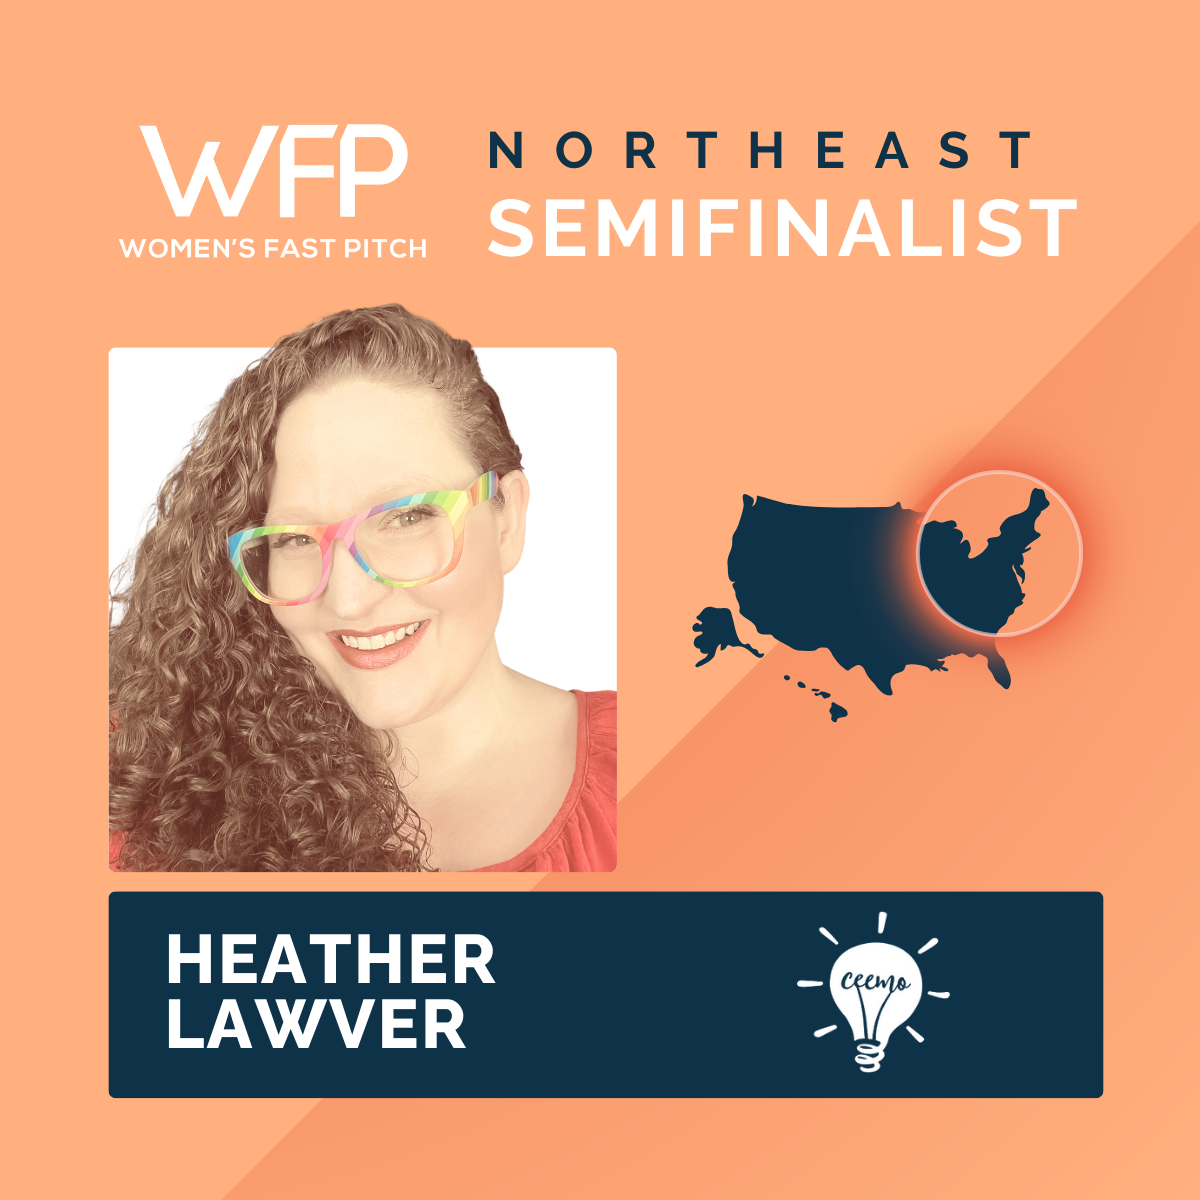 A promotional image created by Stella Foundation, announcing the Ceemo's Founder & CEO, Heather Lawver, is a Regional Semifinalist in the Stella Foundation Women's Fast Pitch Competition! The image shows a portrait of Heather Lawver, a white woman with excessively curly reddish brown hair, wearing a red gathered blouse & rainbow glasses. Below her is her name and the Ceemo lightbulb logo. Next to her is a silhouette of the United States, with the northeast region circled. Stella logo and promotional image used with permission.